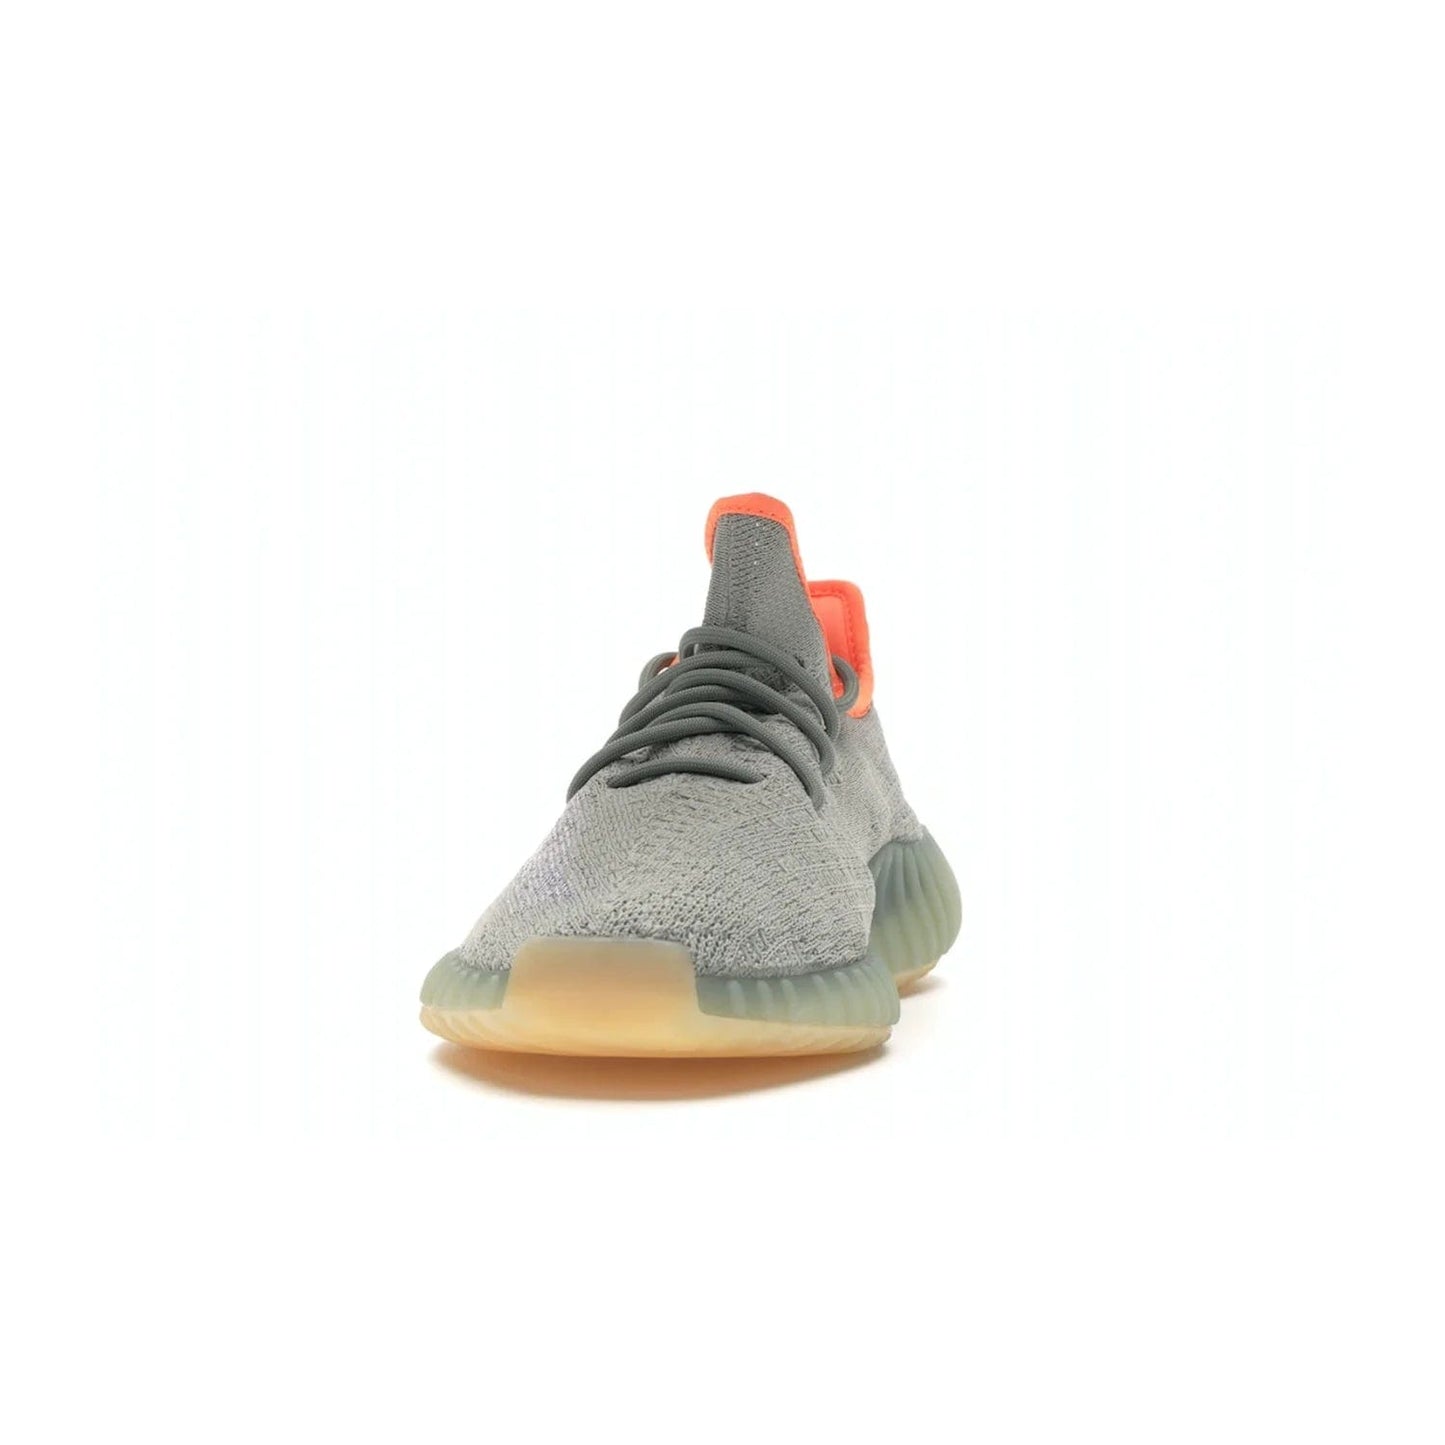 adidas Yeezy Boost 350 V2 Desert Sage - Image 11 - Only at www.BallersClubKickz.com - Upgrade your style with the adidas Yeezy Boost 350 V2 Desert Sage. This 350V2 features a Desert Sage primeknit upper with tonal side stripe, and an orange-highlighted translucent Boost cushioning sole. Stay on-trend in effortless style.